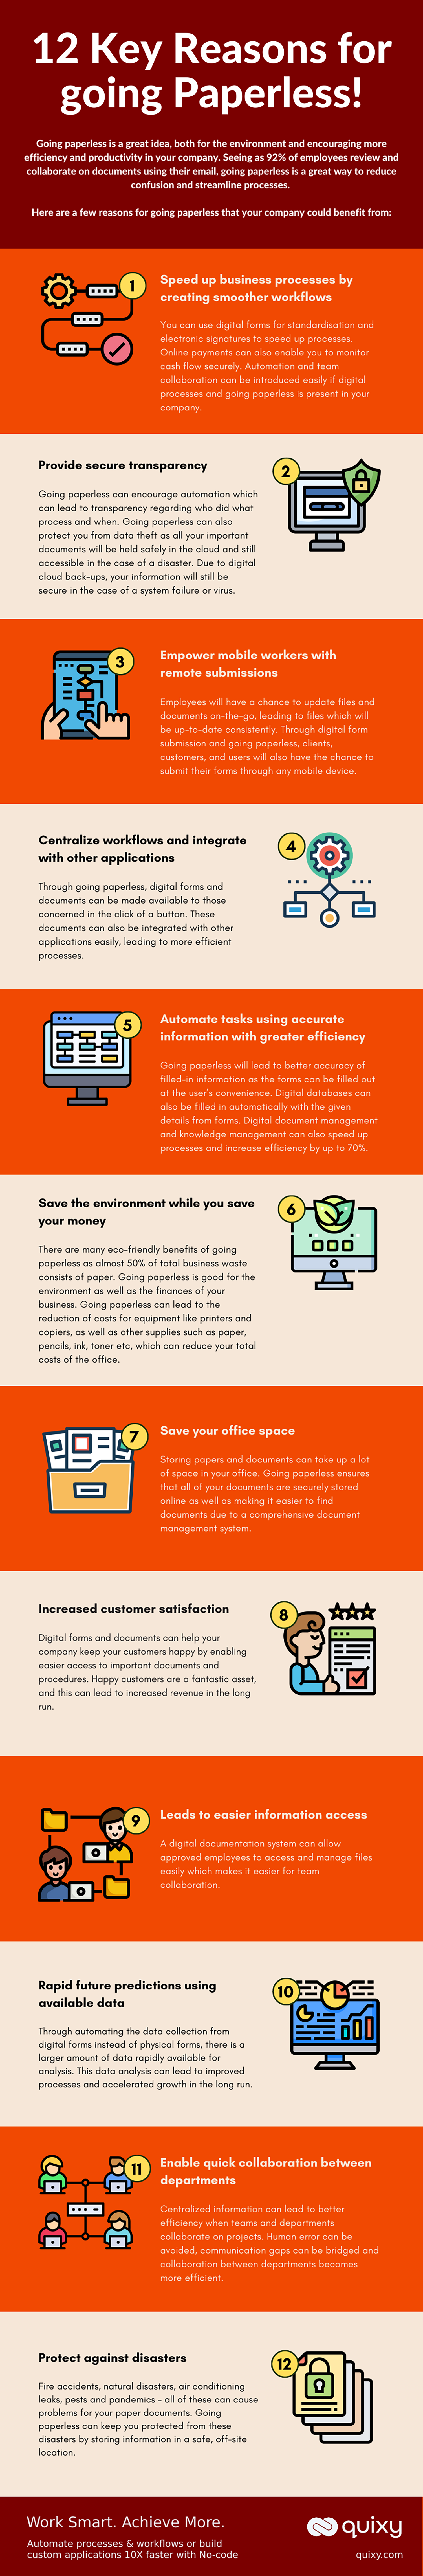 12 key reasons for going paperless Infographic